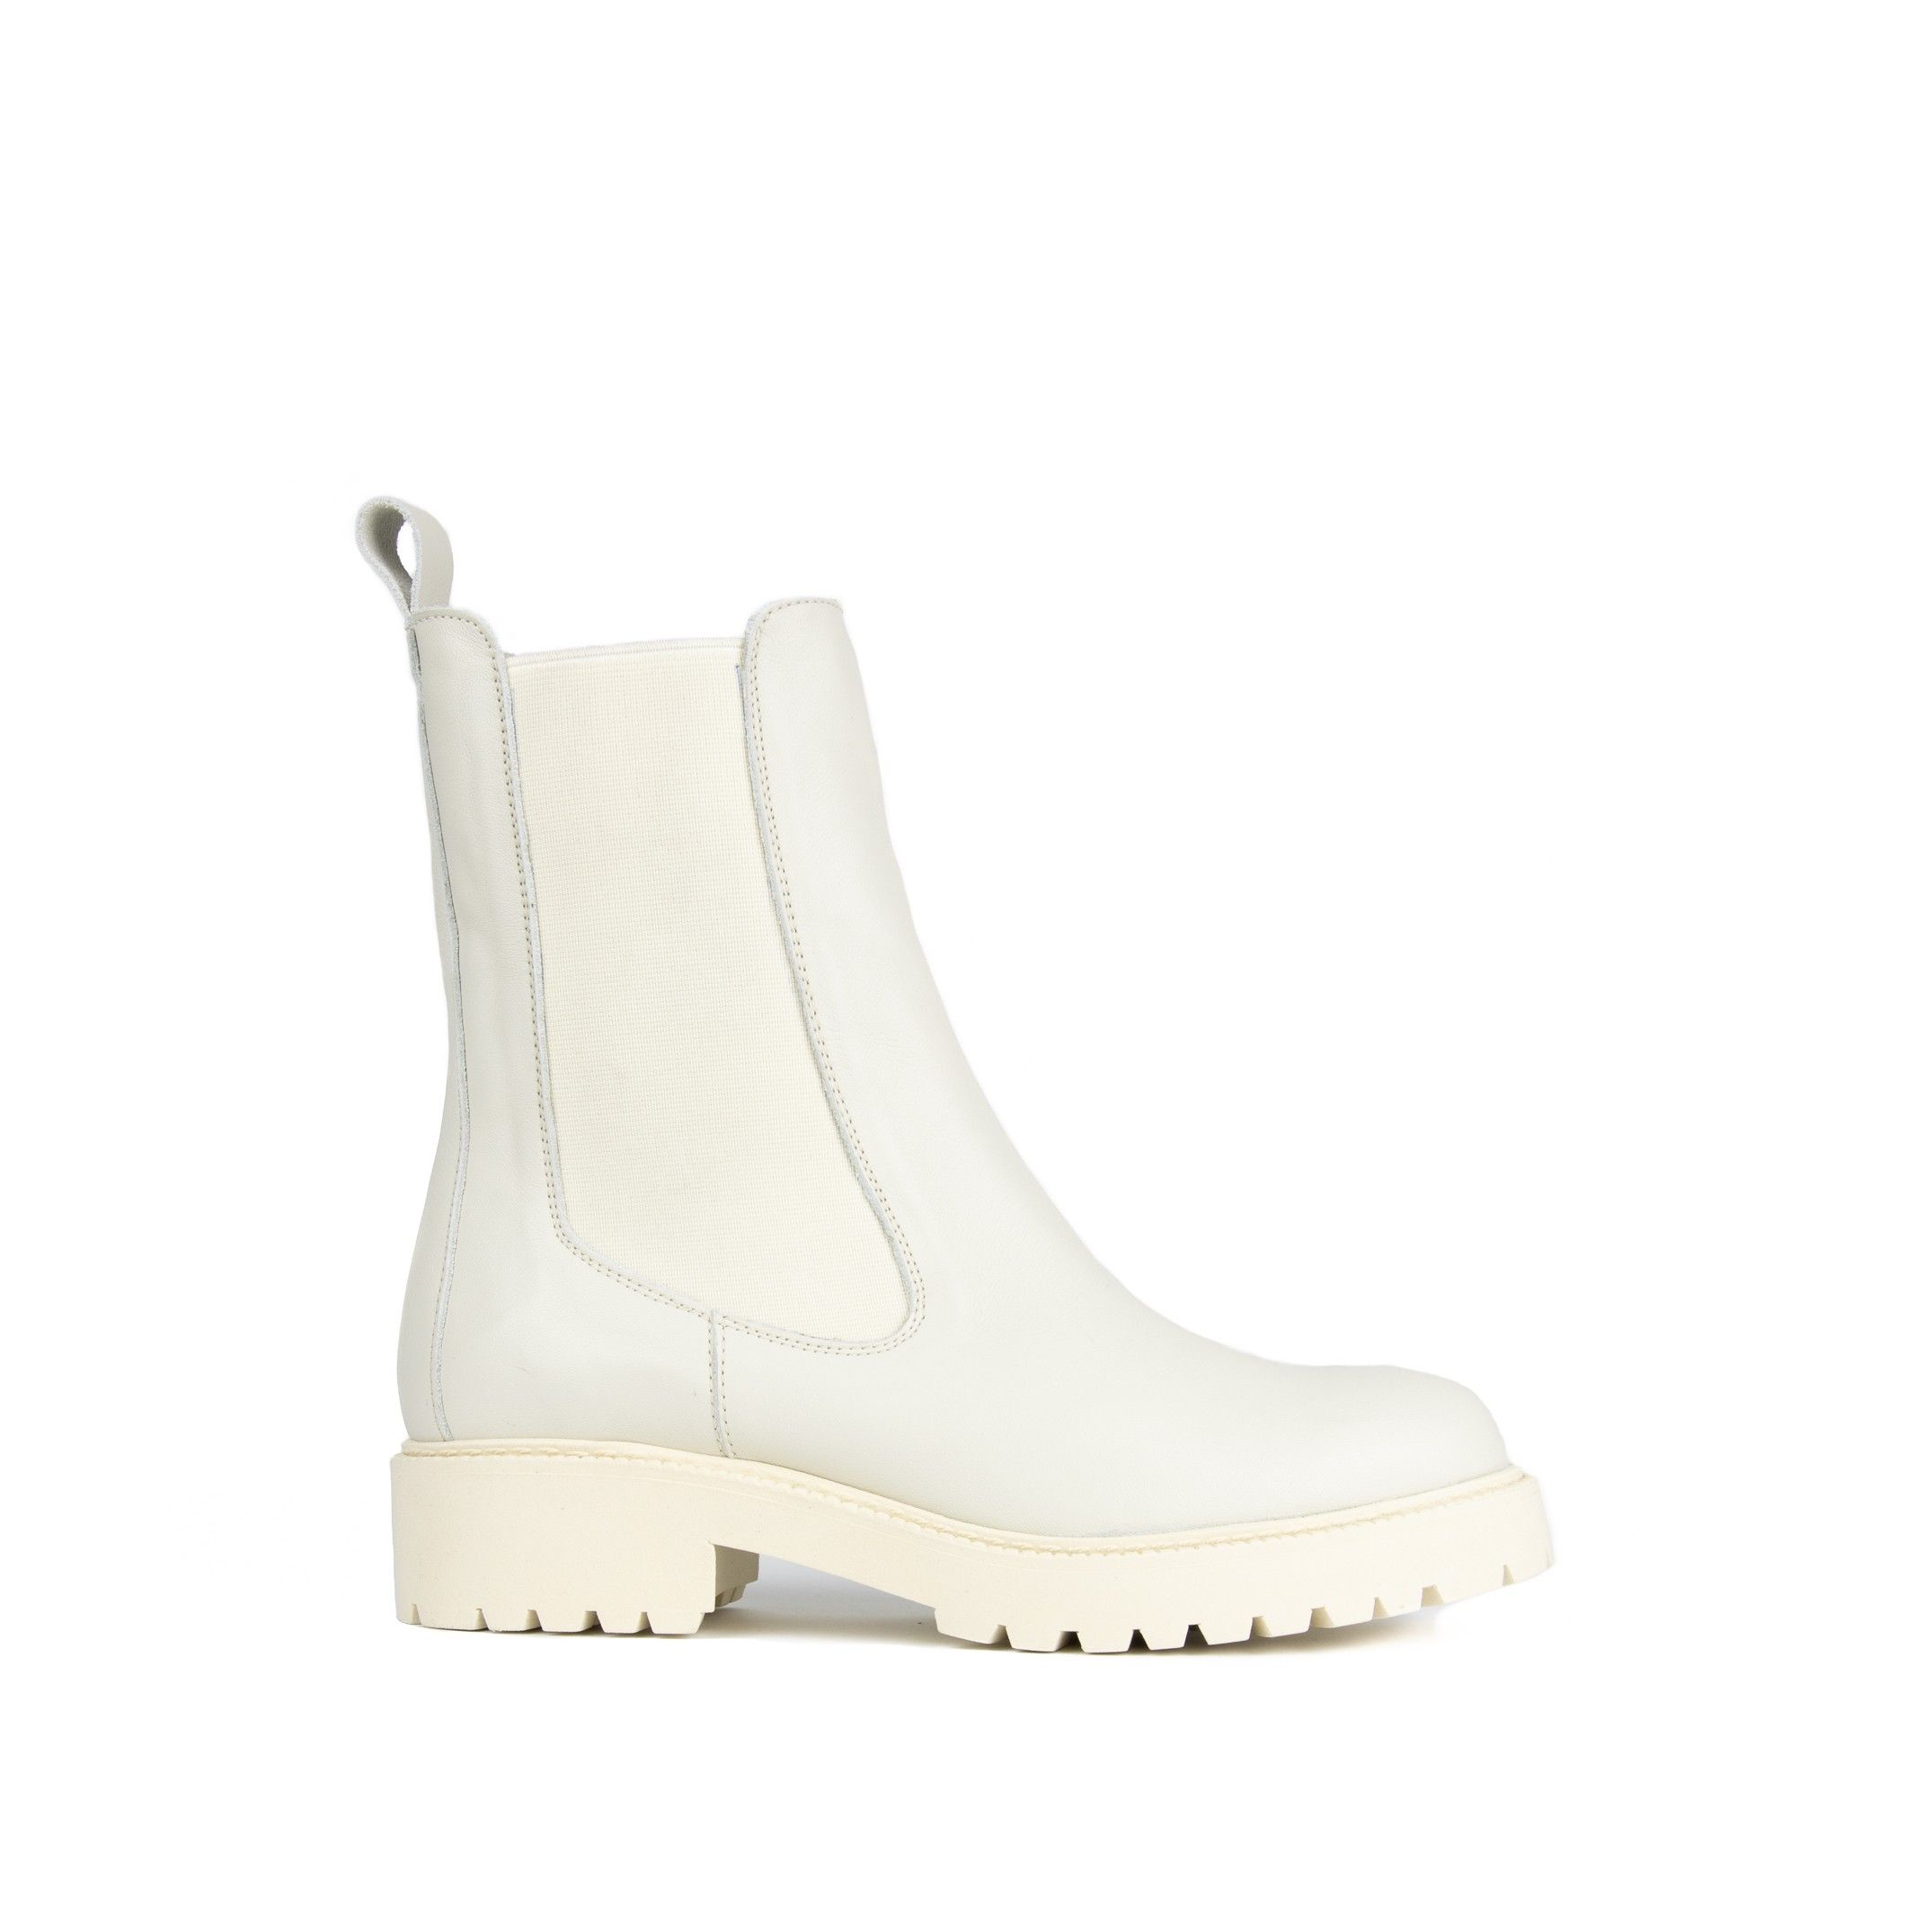 Chelsea track boot by Eva López. Closure: elastic. Exterior: leather. Interior: leather. Insole: leather. Sole: TR slip resistant. Platform: 2 cm. Heel: 3 cm. Shaft height: 18 cm. Made in Spain.